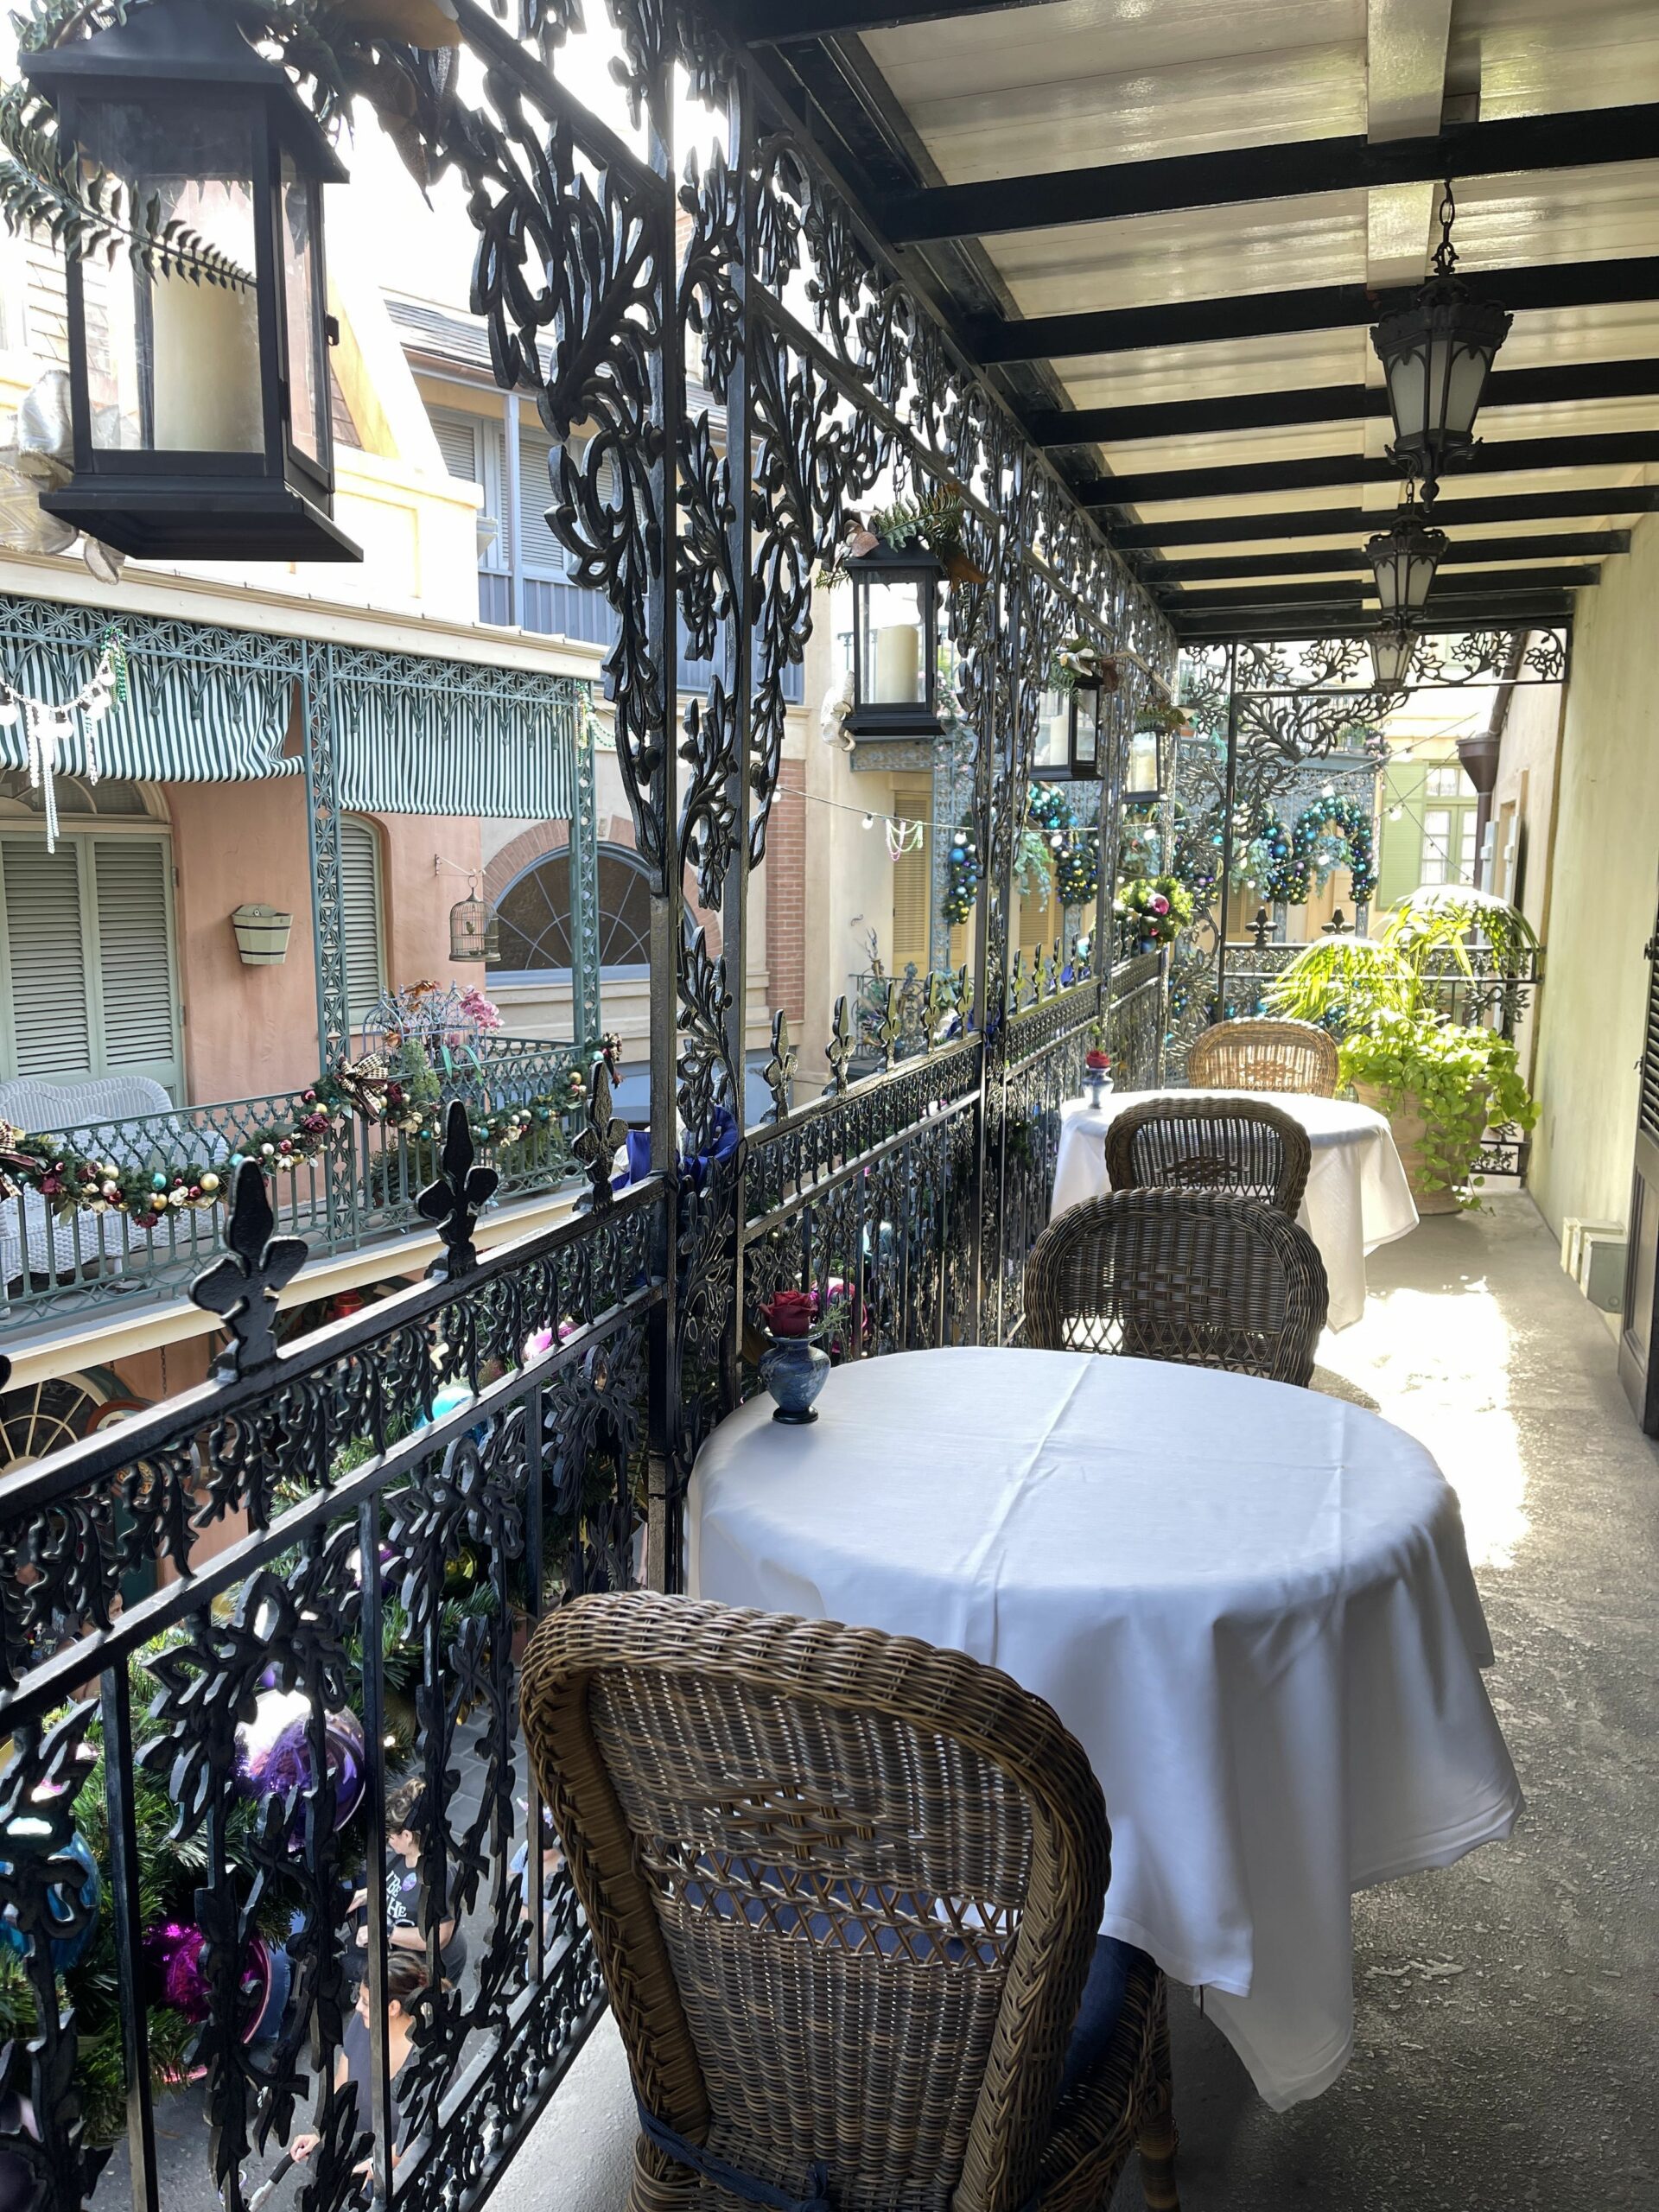 View of the balcony onto New Orleans Square.